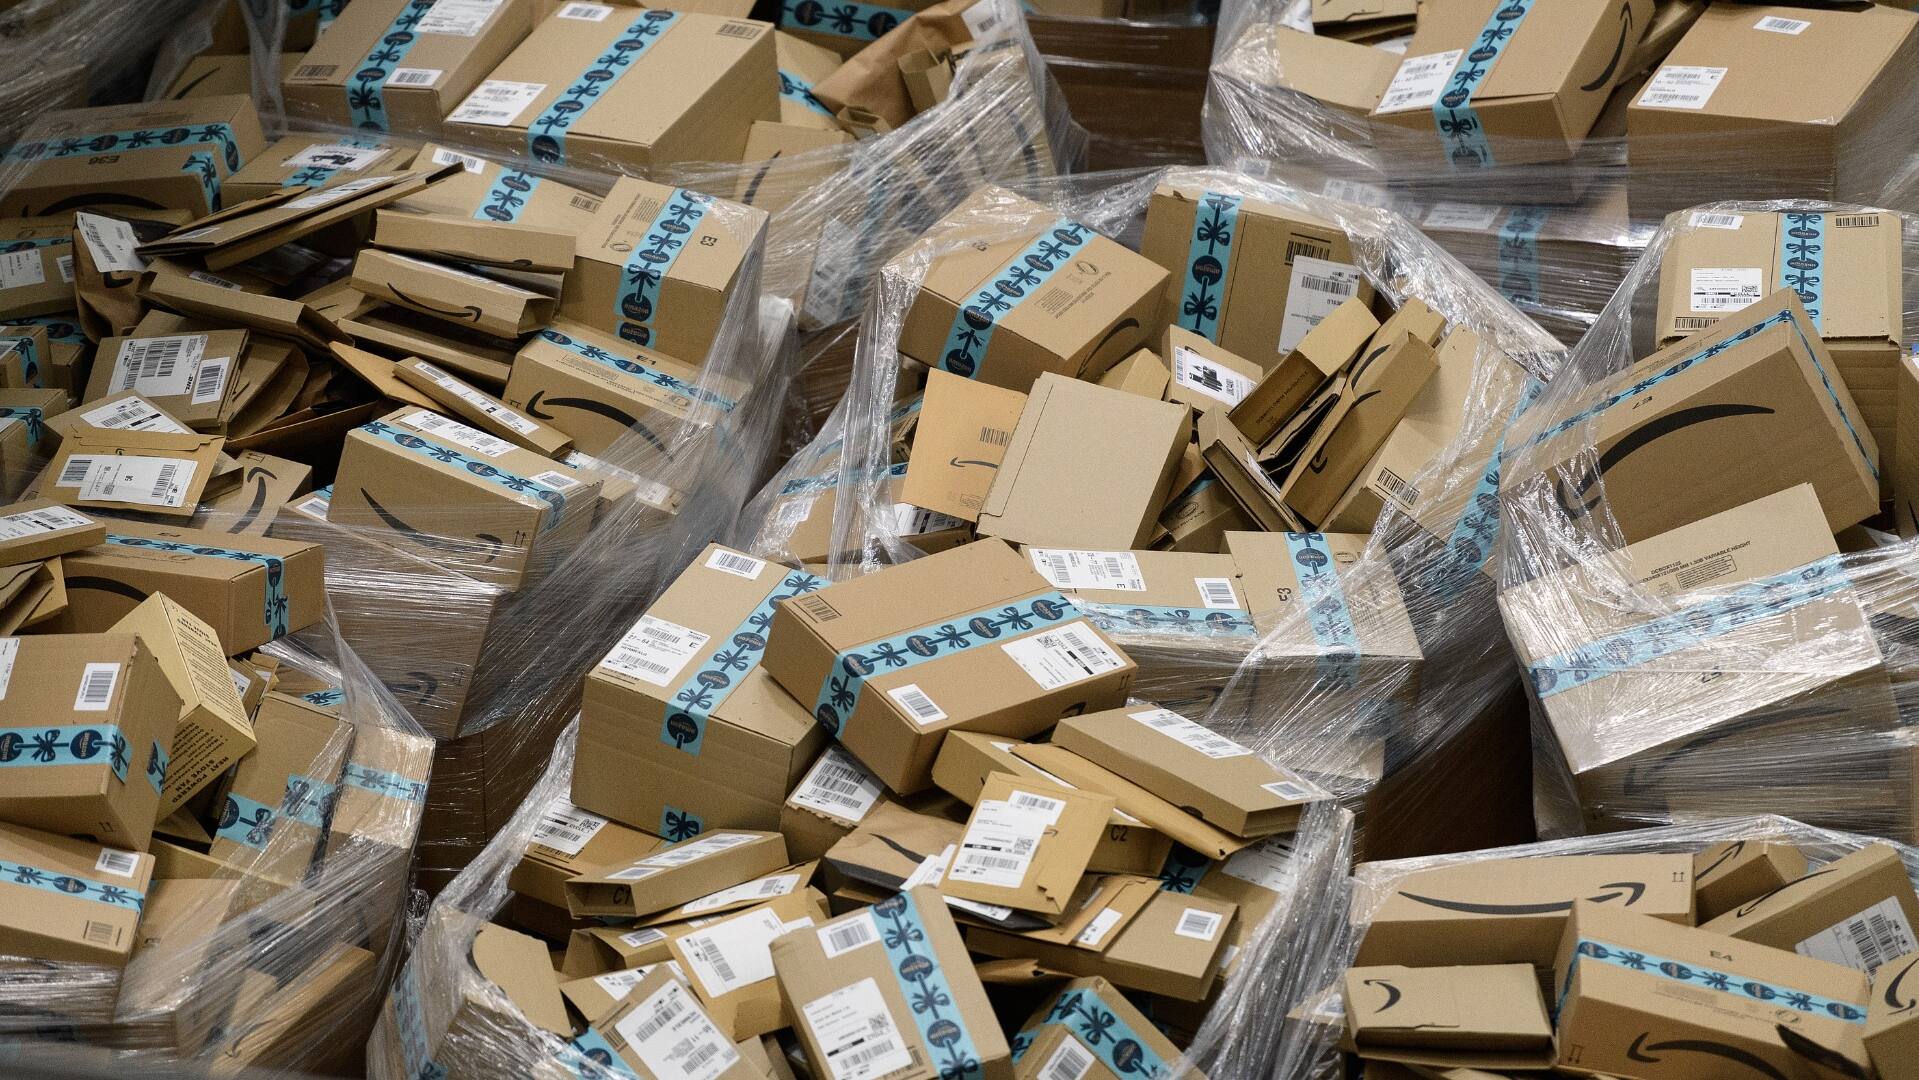 b c woman buried in amazon packages she did not ask for and does not want